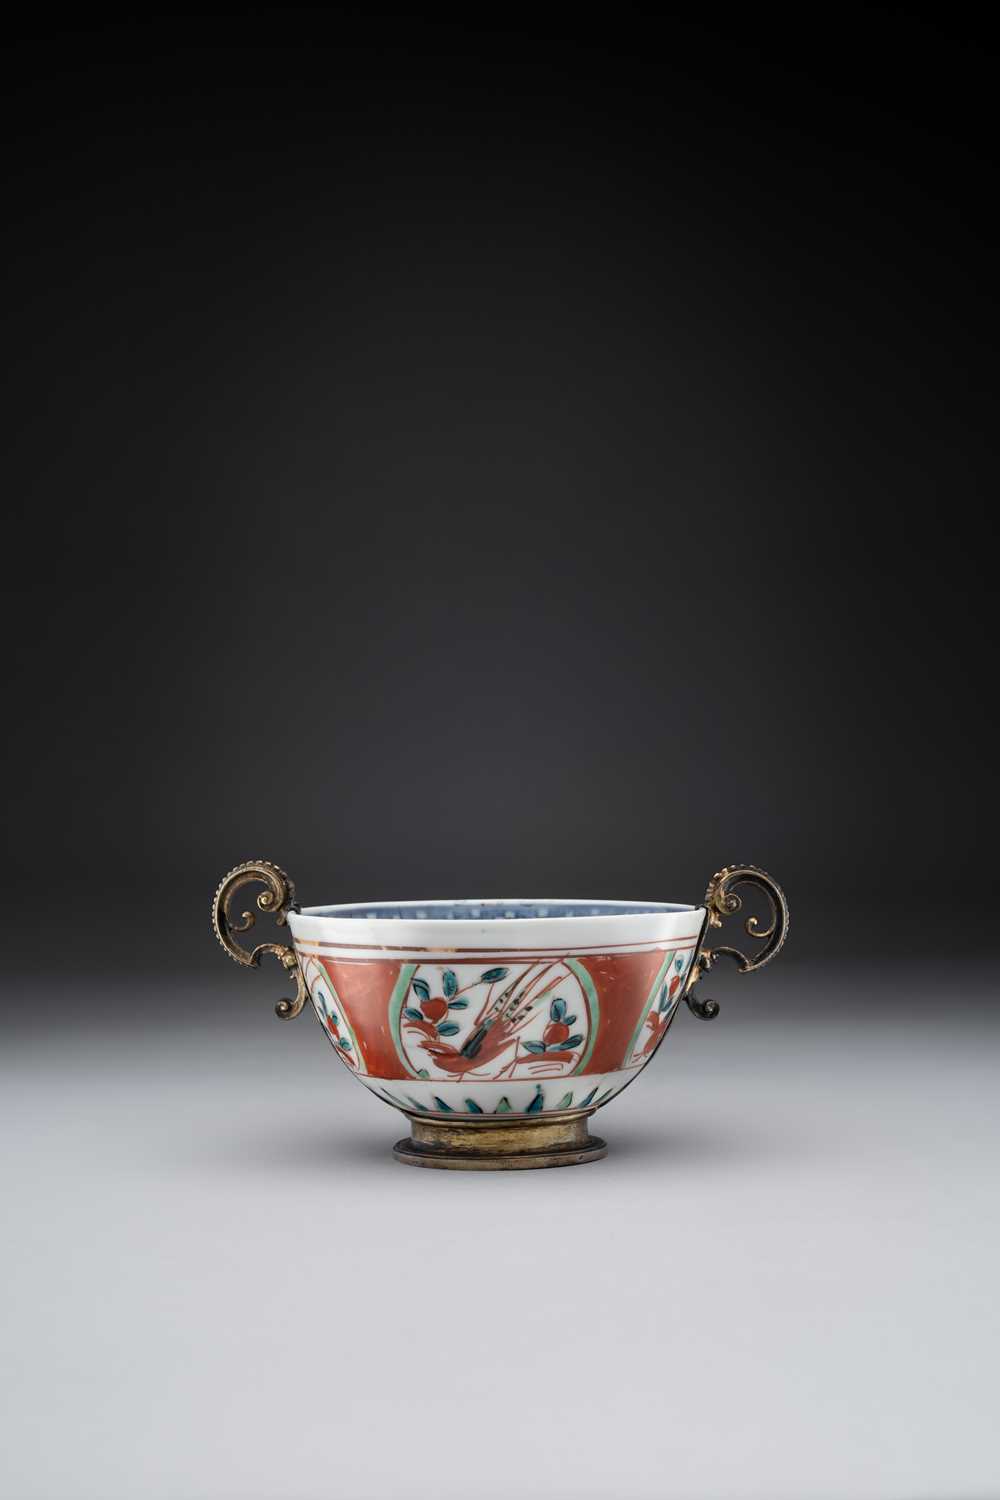 A RARE CHINESE WUCAI SILVER-GILT MOUNTED BOWL JIAJING 1522-66 The exterior painted with iron-red,